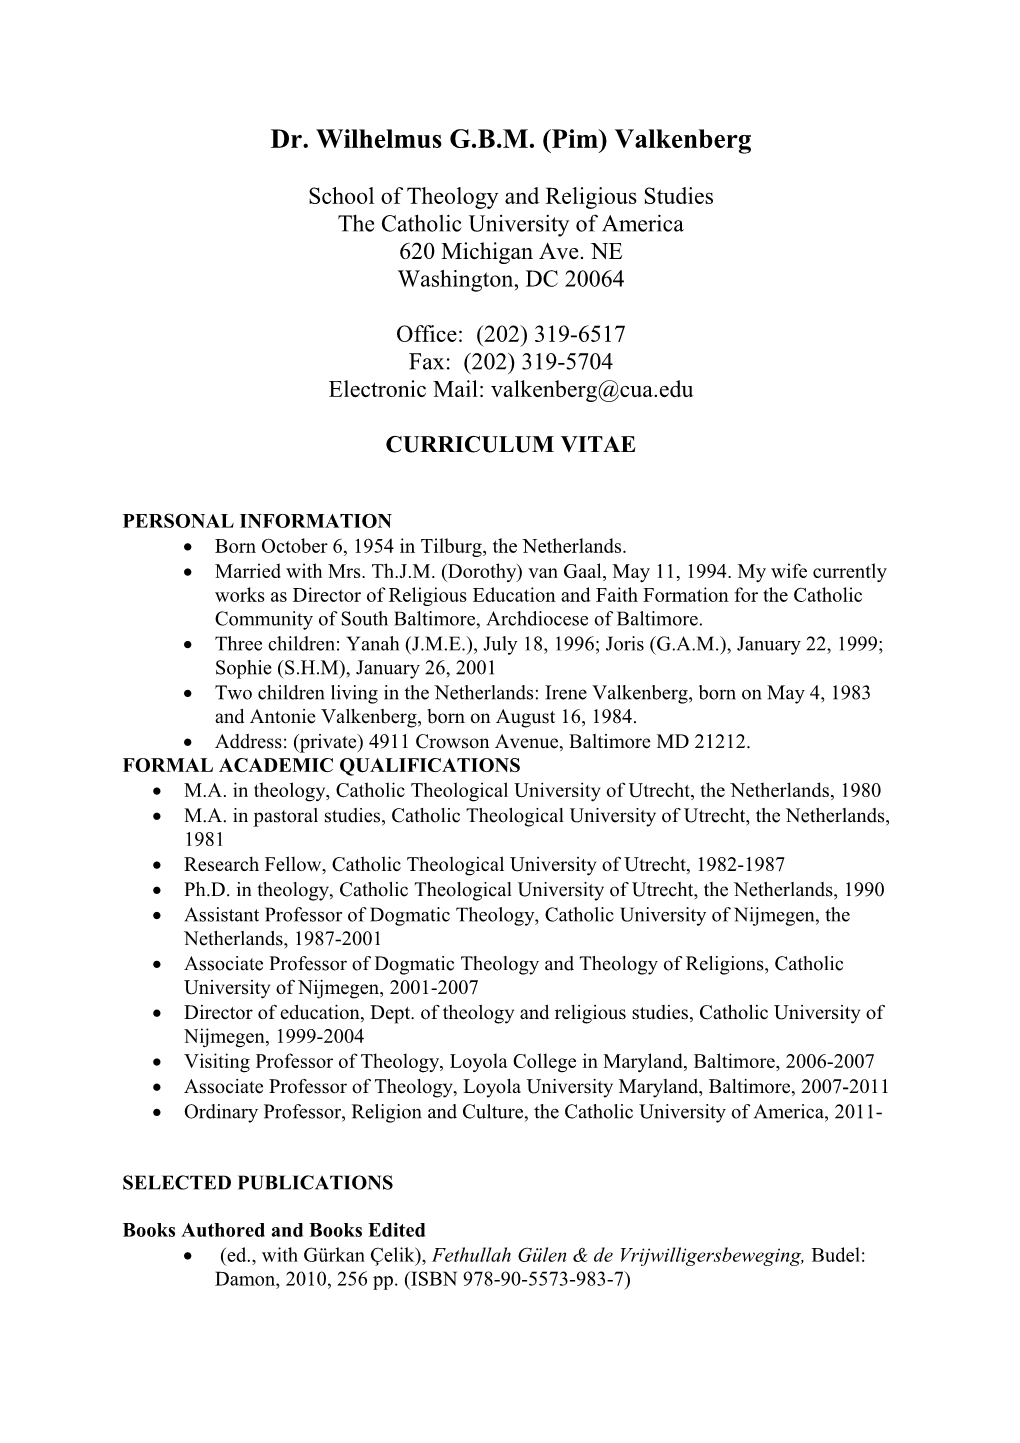 Curriculum Vitae for Application As Visiting Scholar at Notre Dame University, Fall 2004